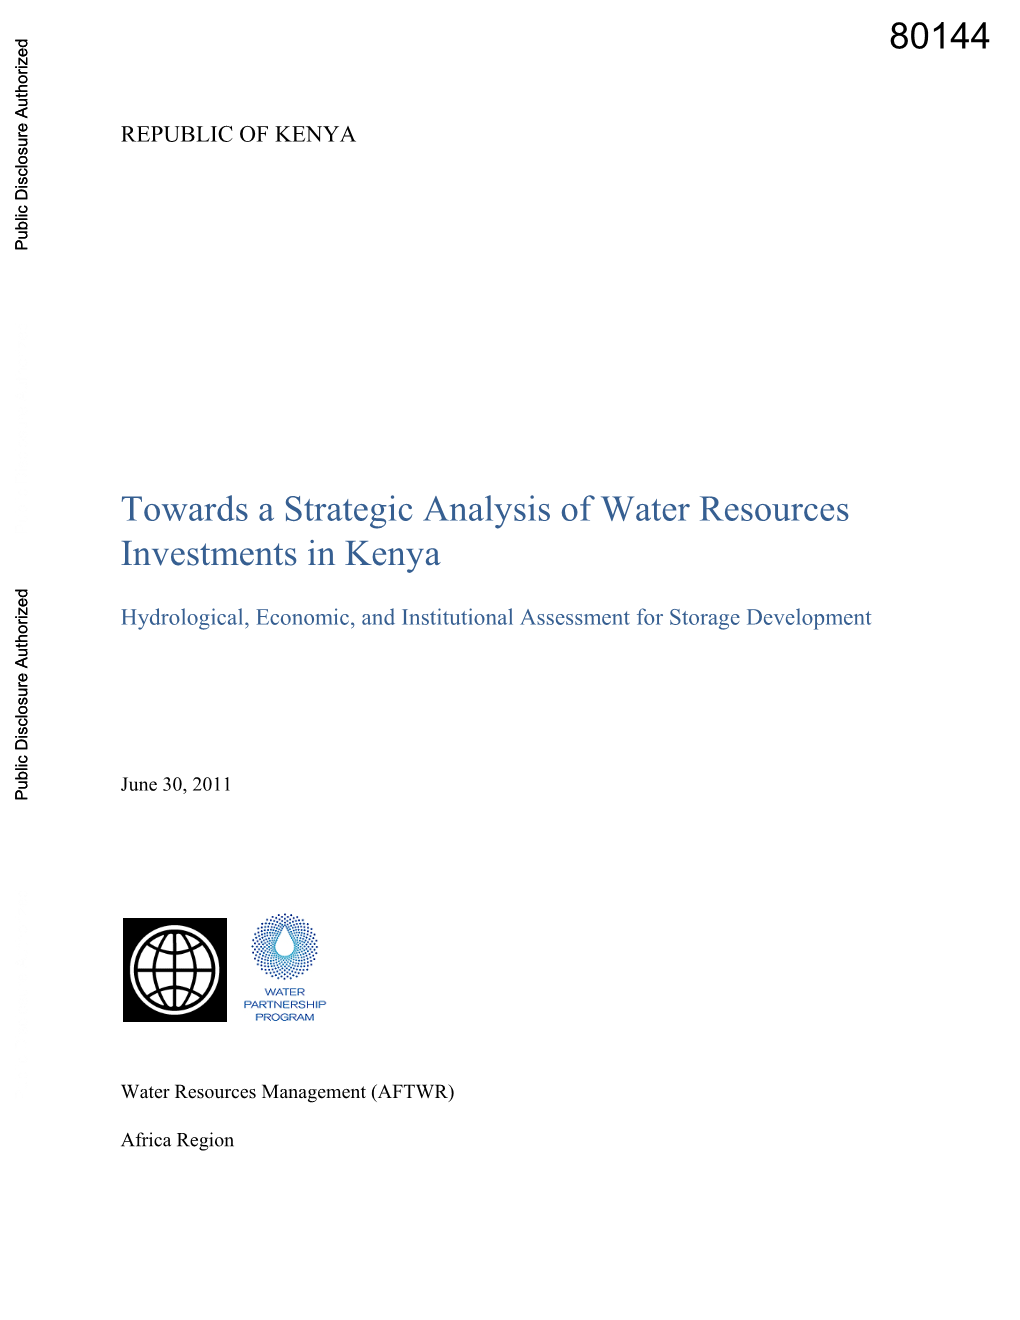 5.4 Water Storage Investments: Results of Preliminary Economic Analysis